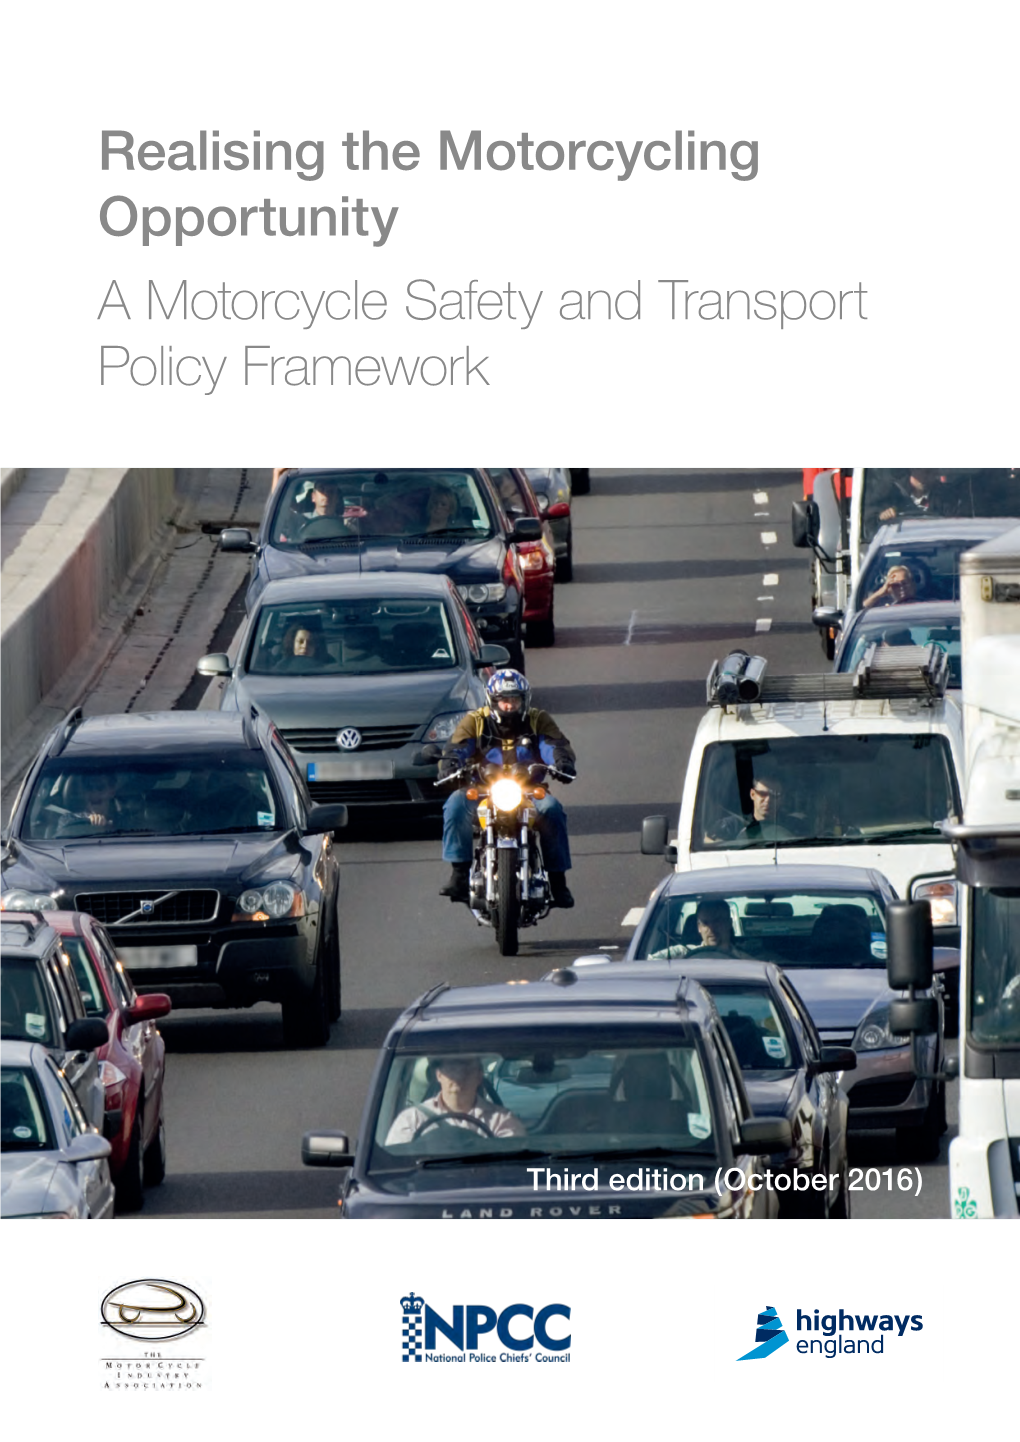 A Motorcycle Safety and Transport Policy Framework